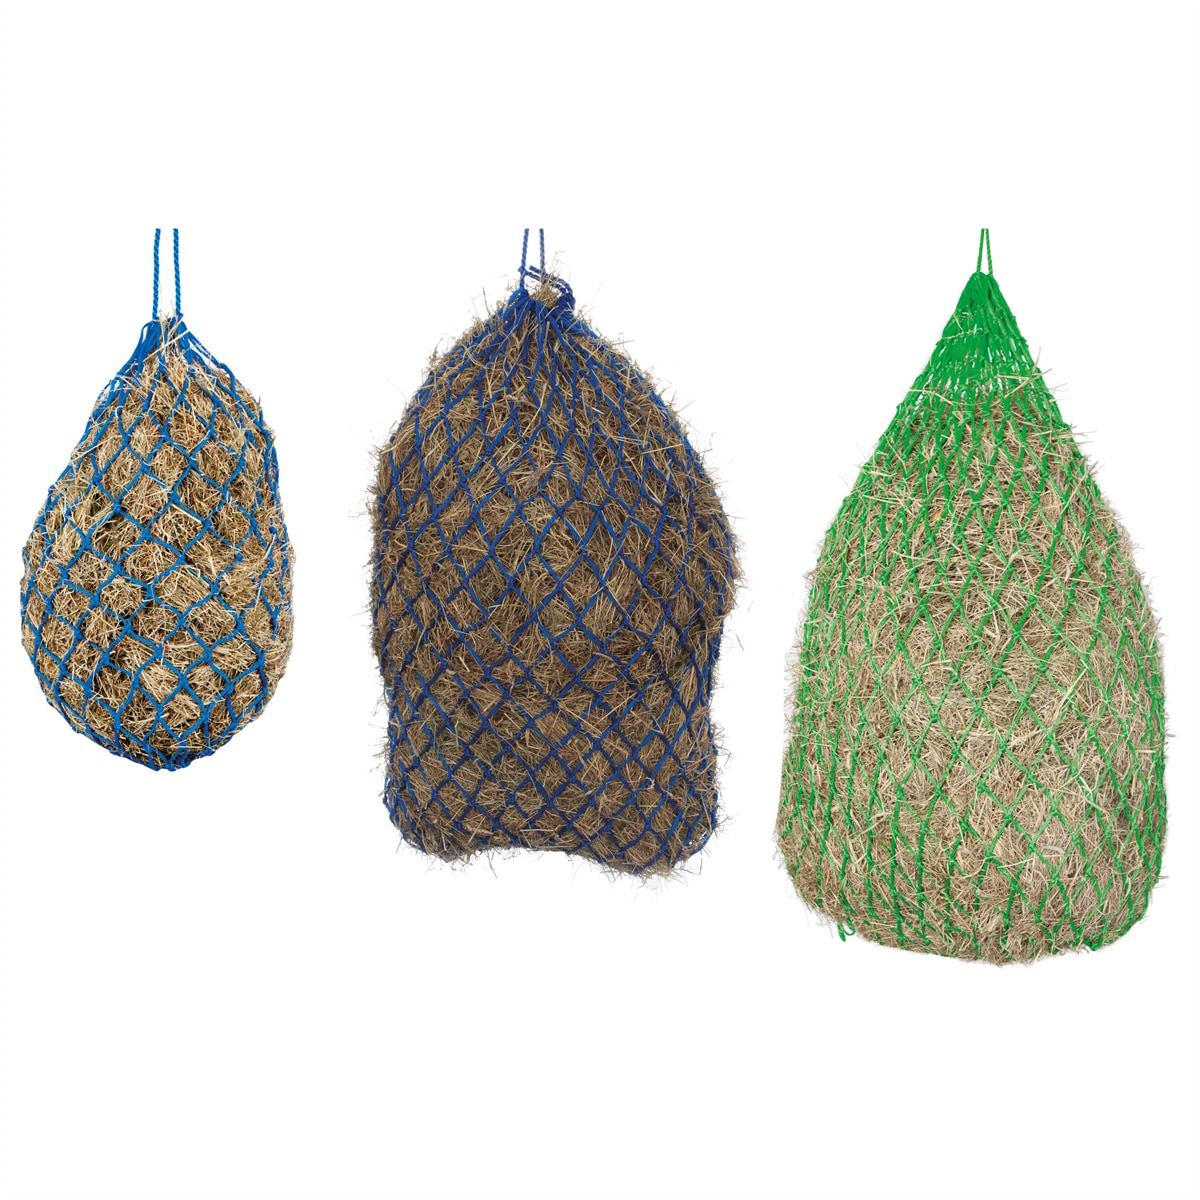 Shires 5 Pack Extra Strong Large Ringed Haynet Haylage Nets Assorted Colours 42" 